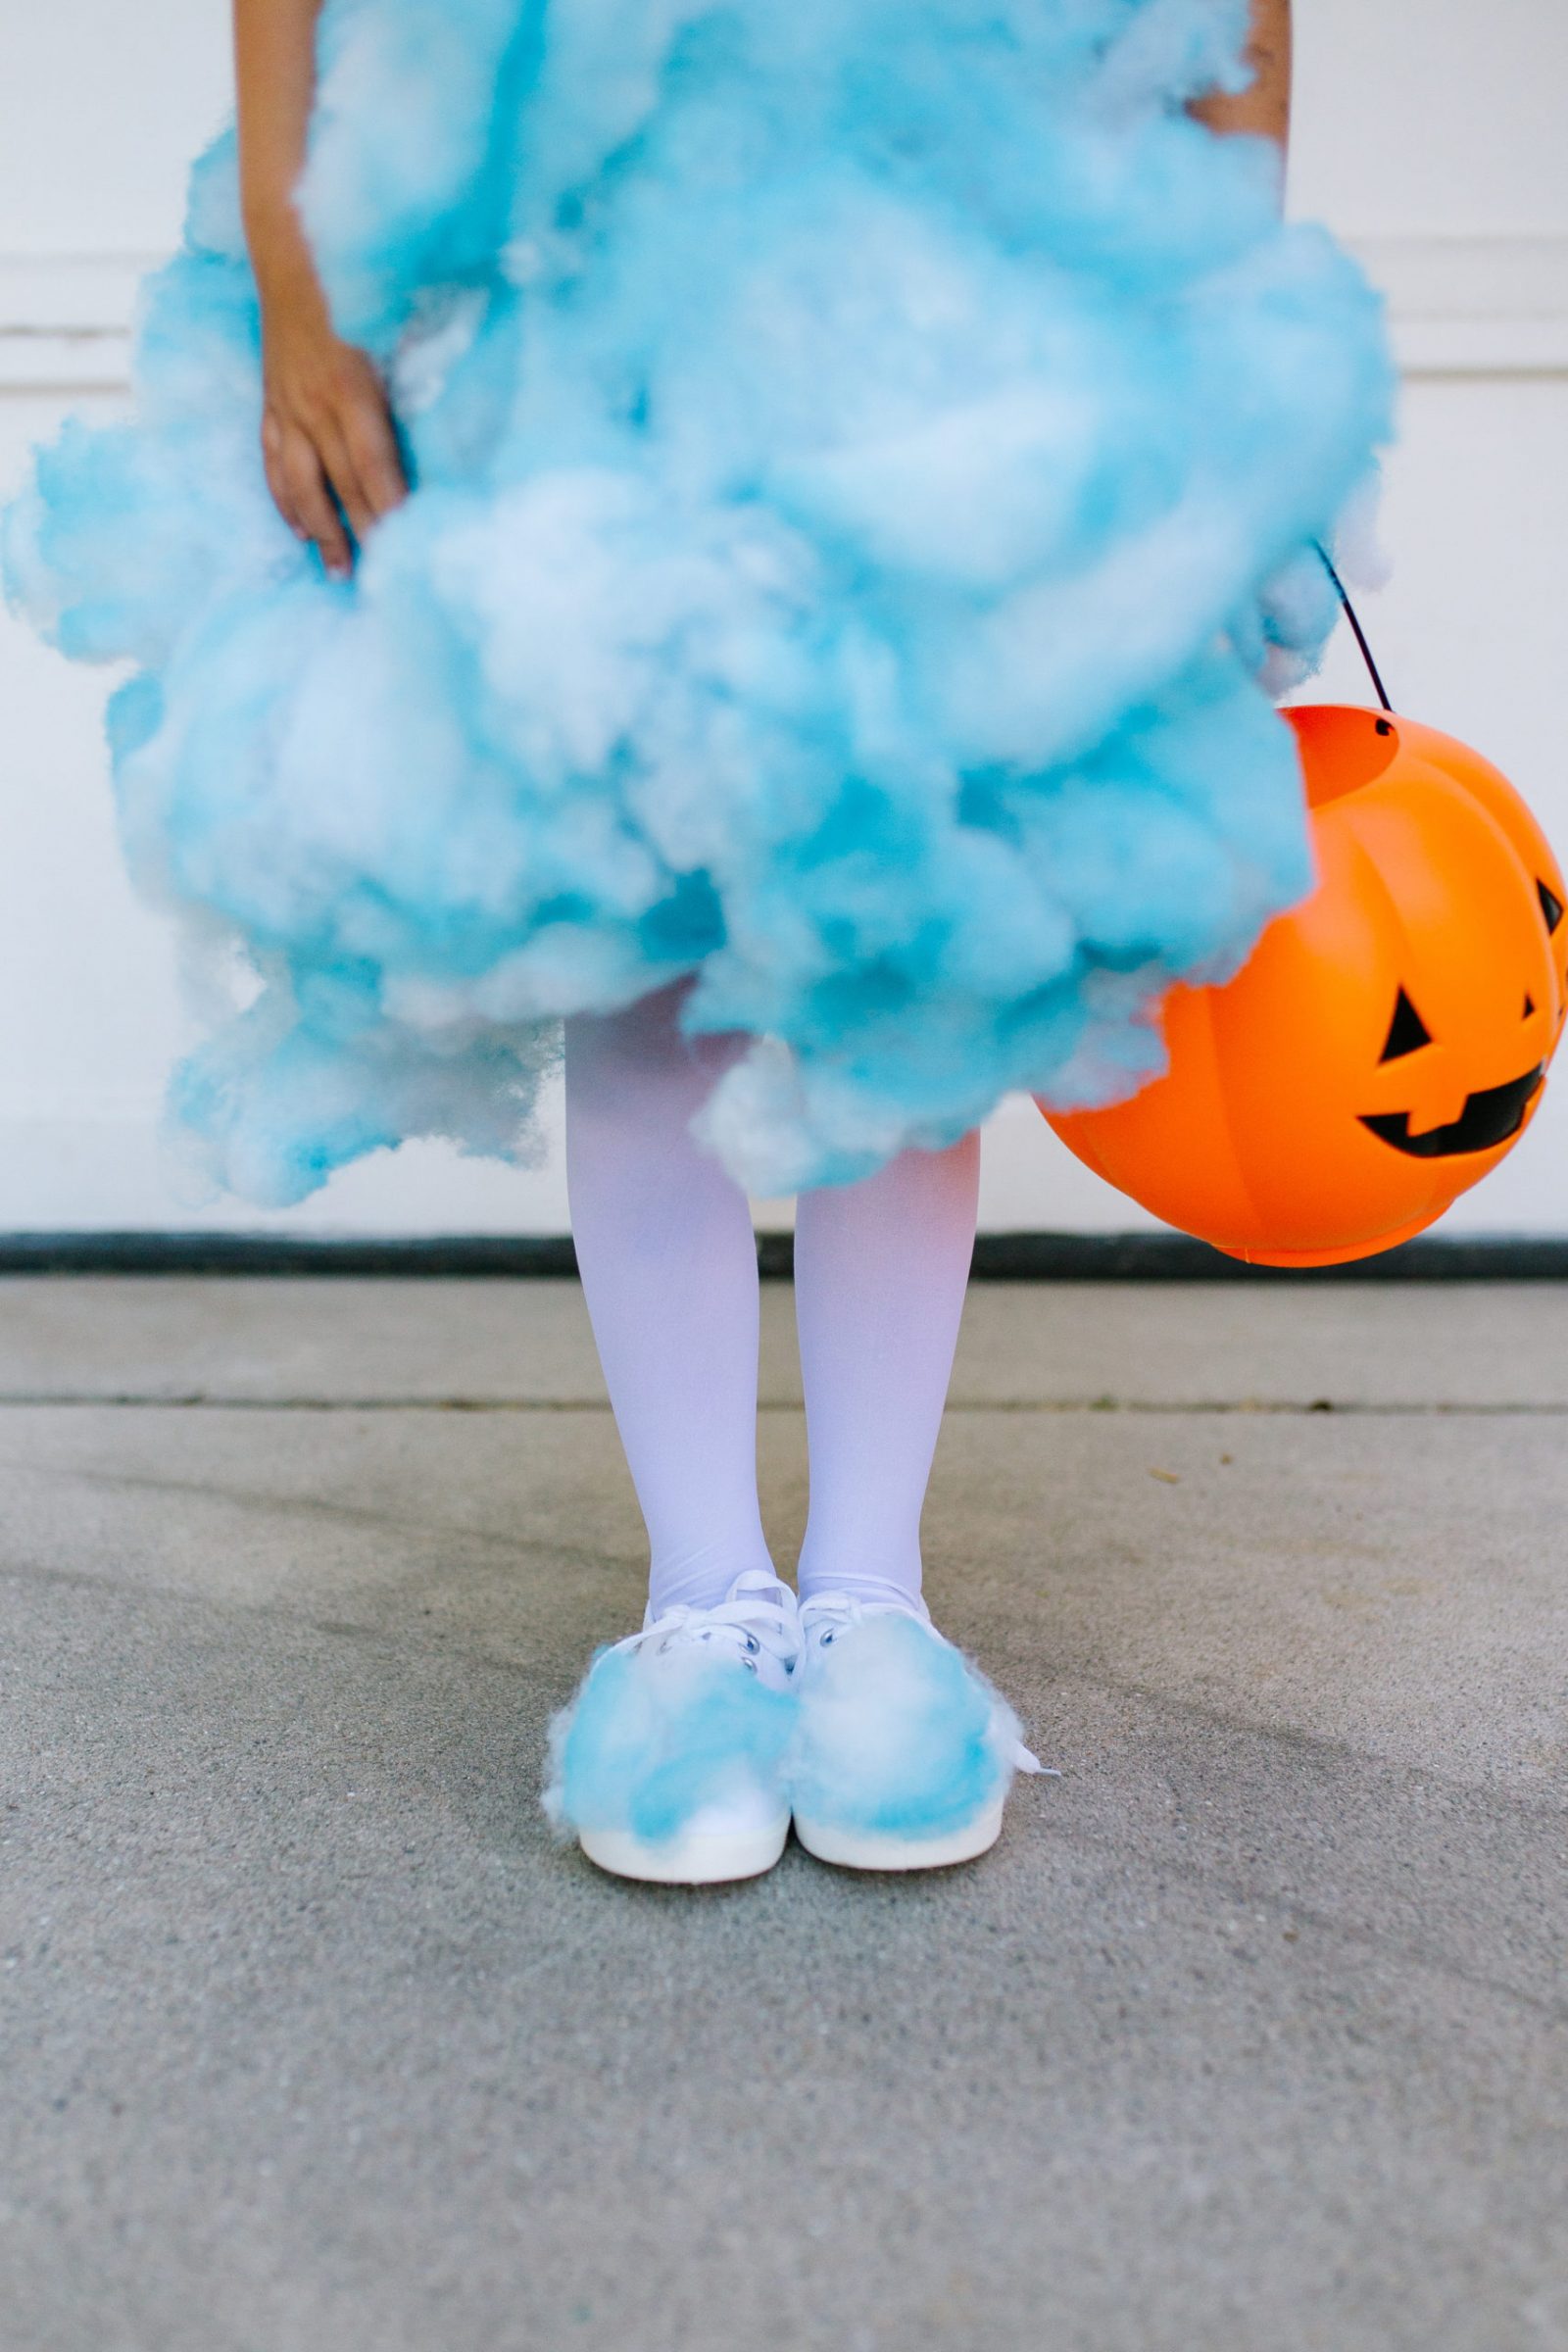 Halloween Costume Ideas: DIY Cotton Candy Costume for Kids + a tutorial featured by Top US Craft Blog + The Pretty Life Girls